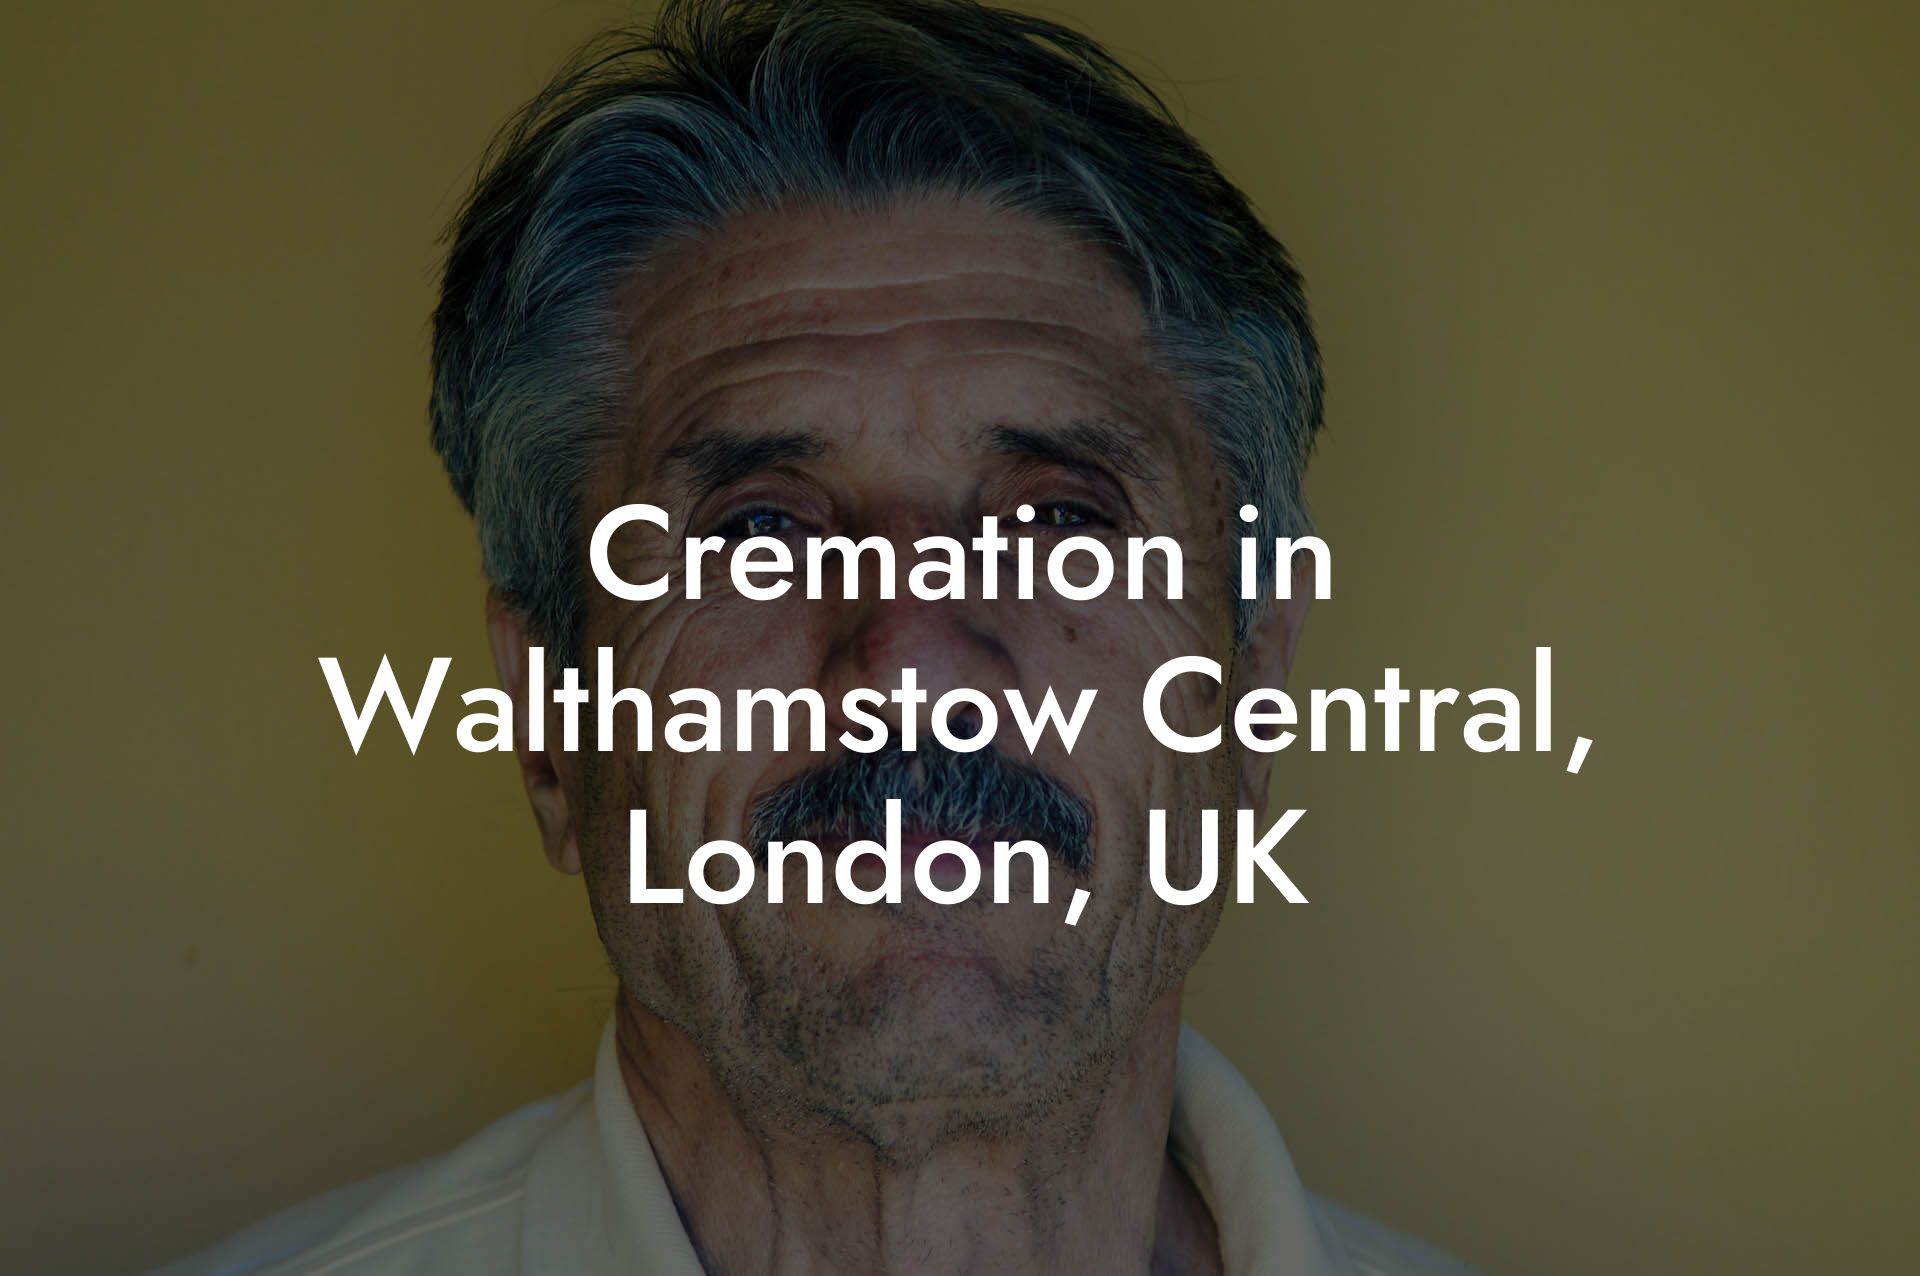 Cremation in Walthamstow Central, London, UK